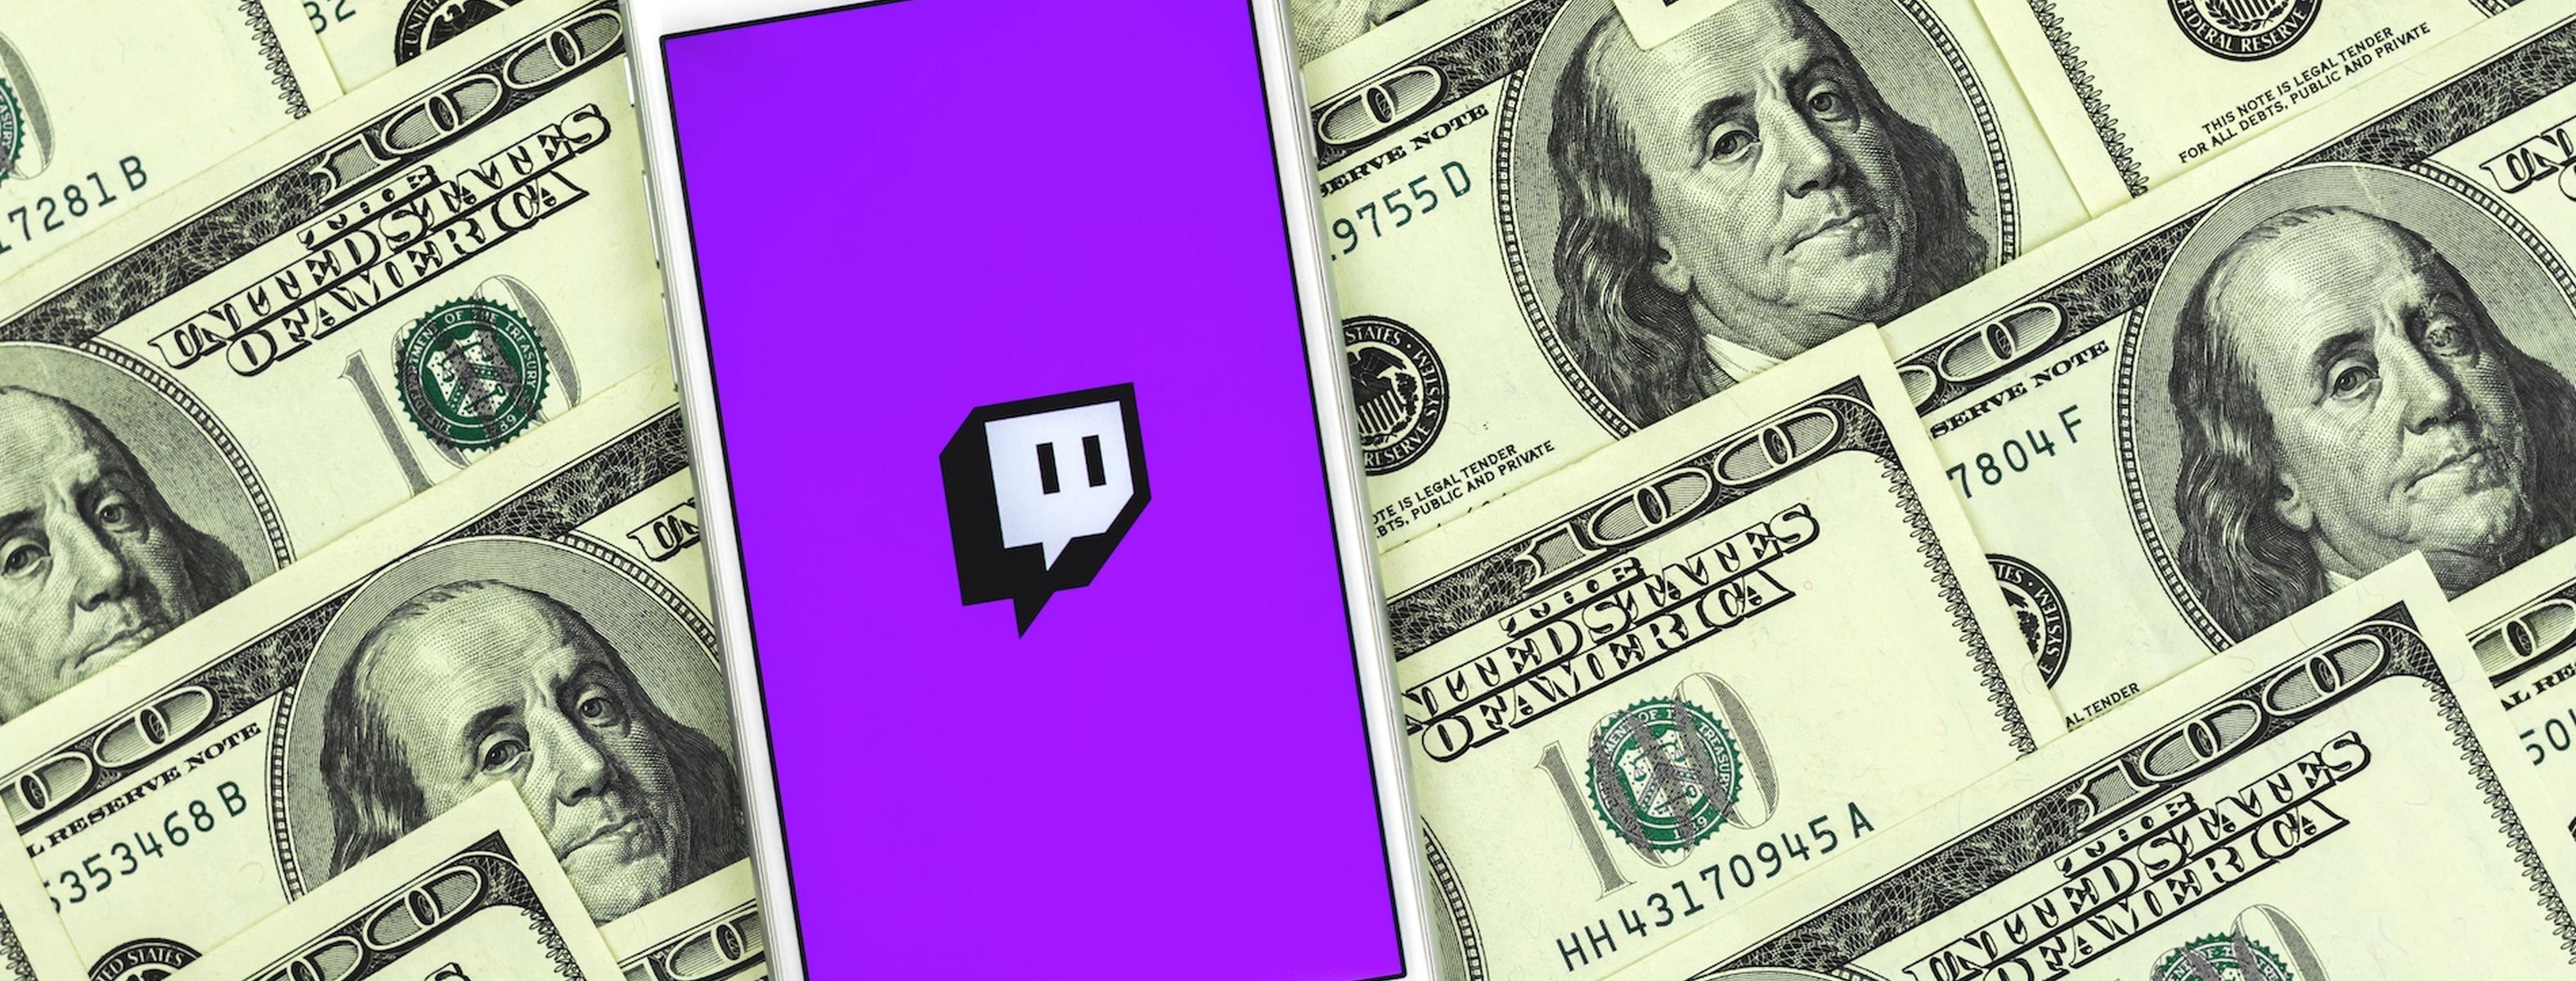 How Does Twitch.tv Make Money?